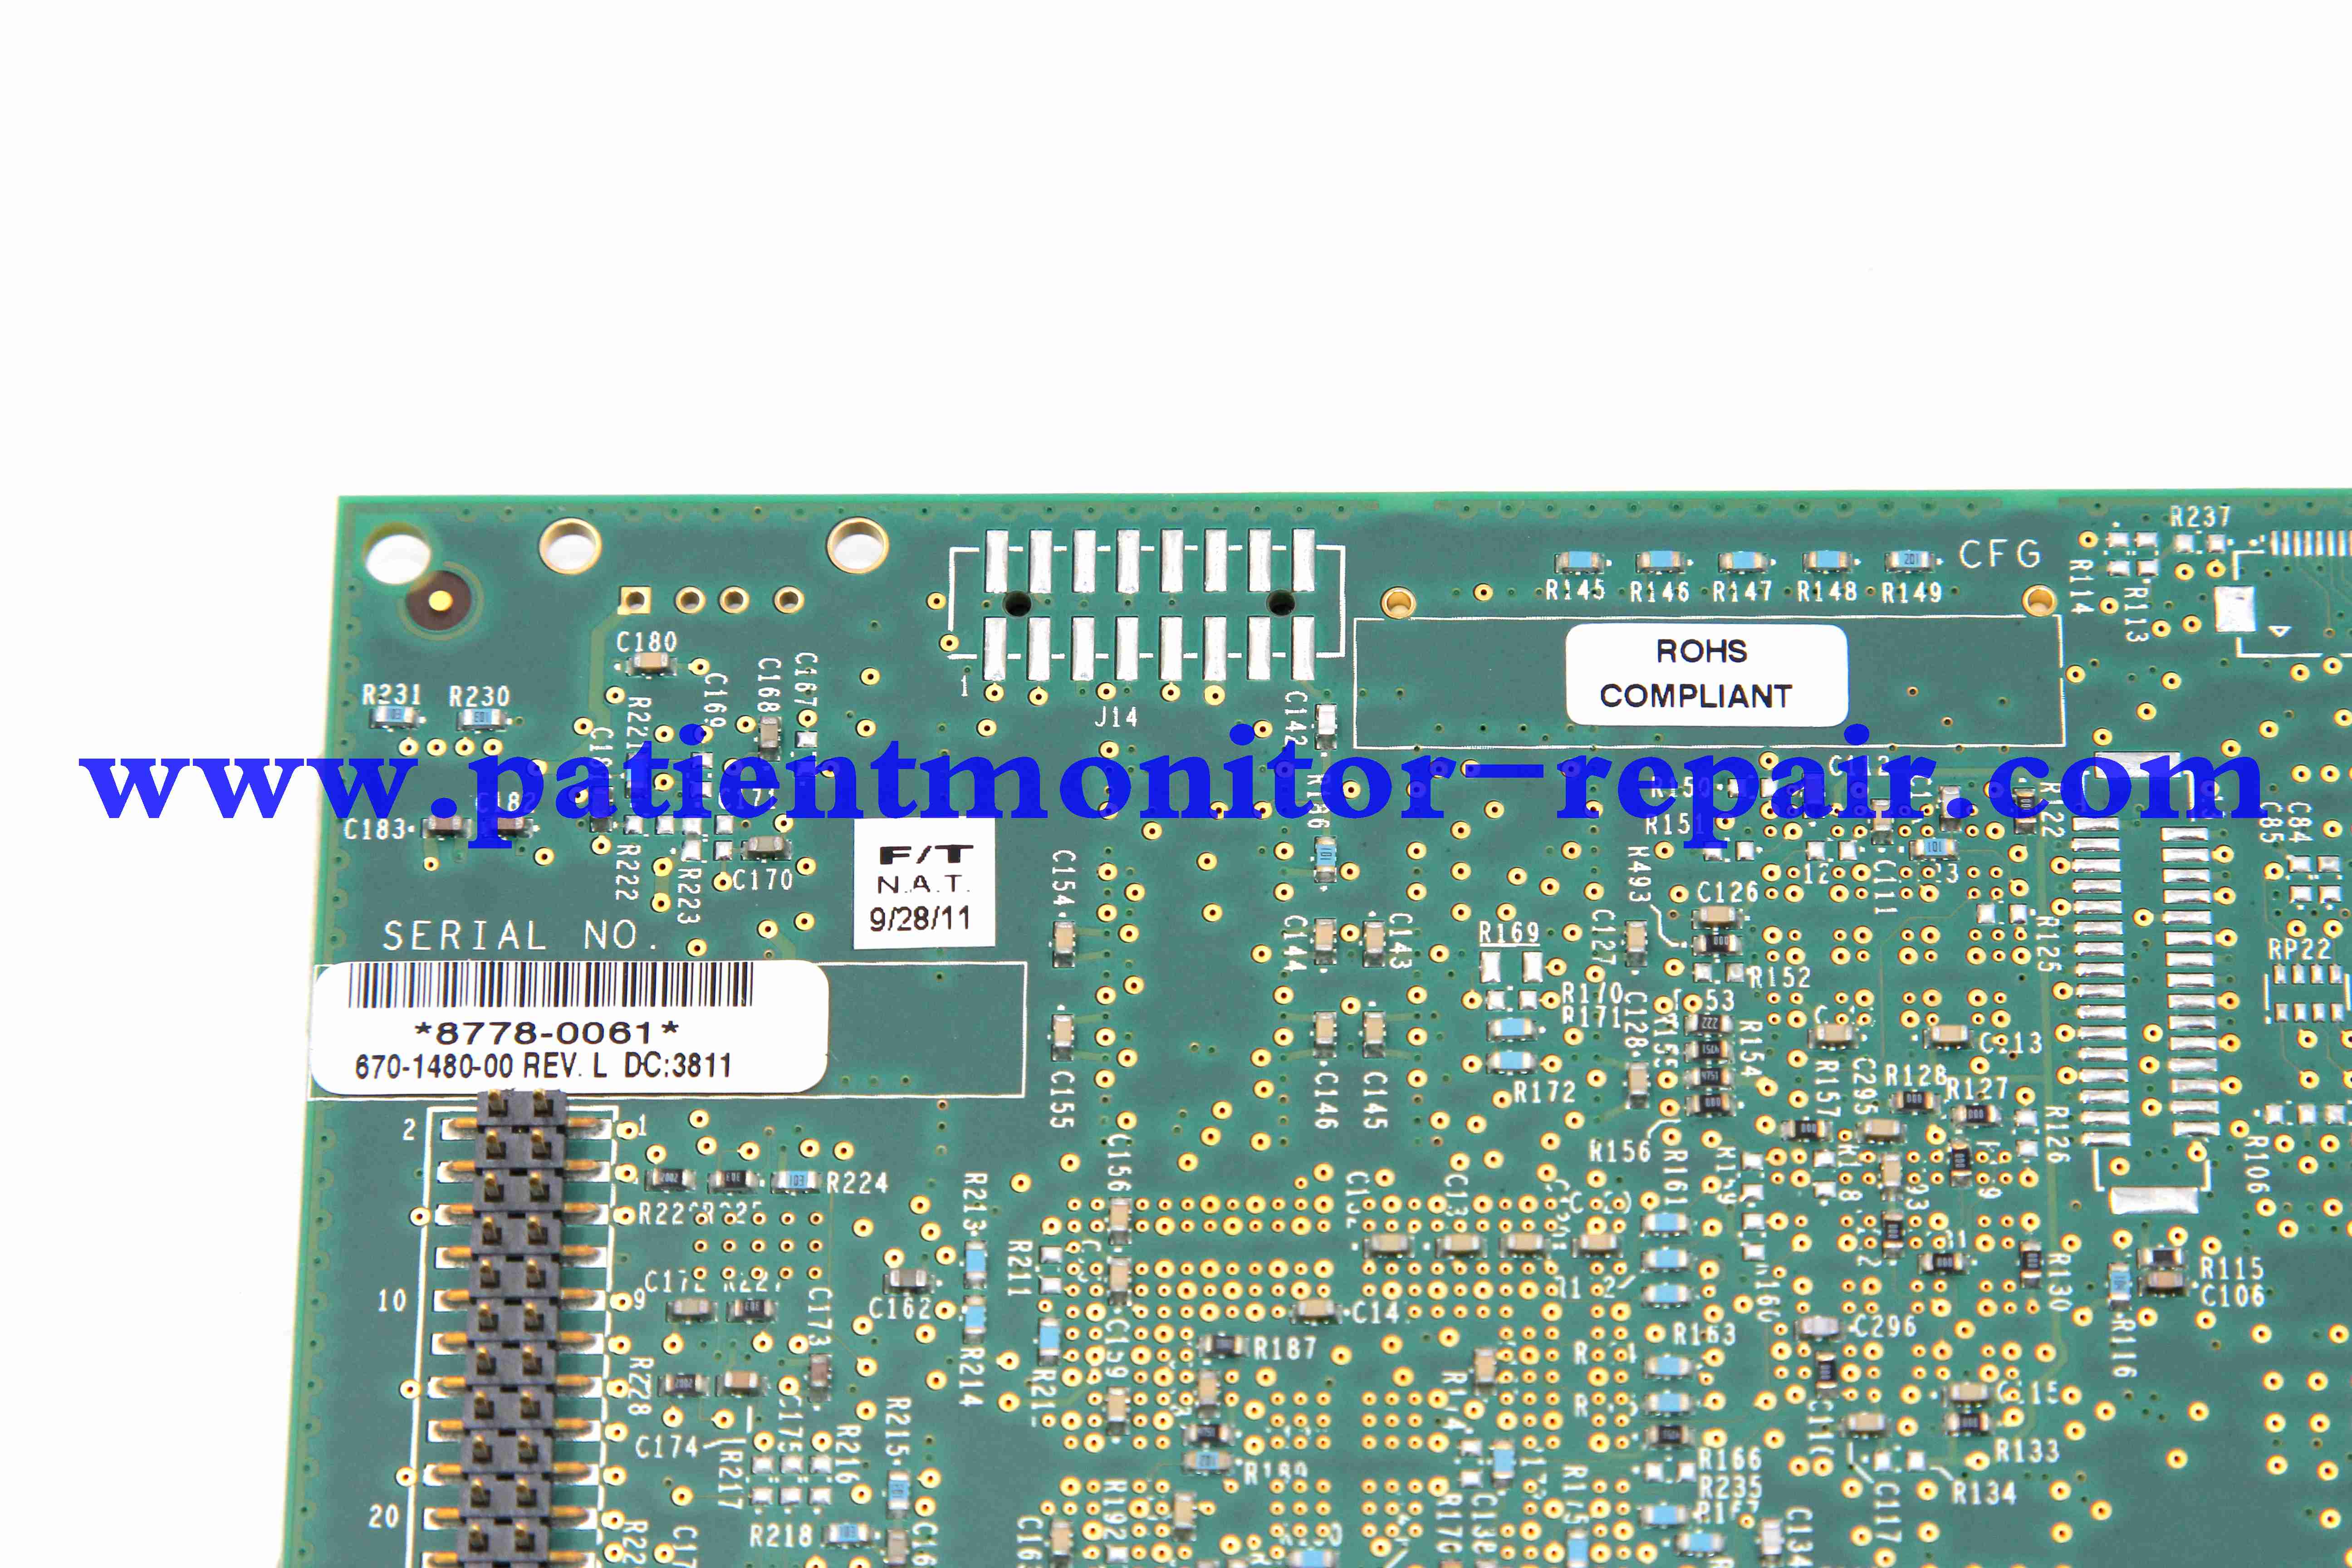 Spacelabs 91330 patient monitor CPU board 670-1480-00 